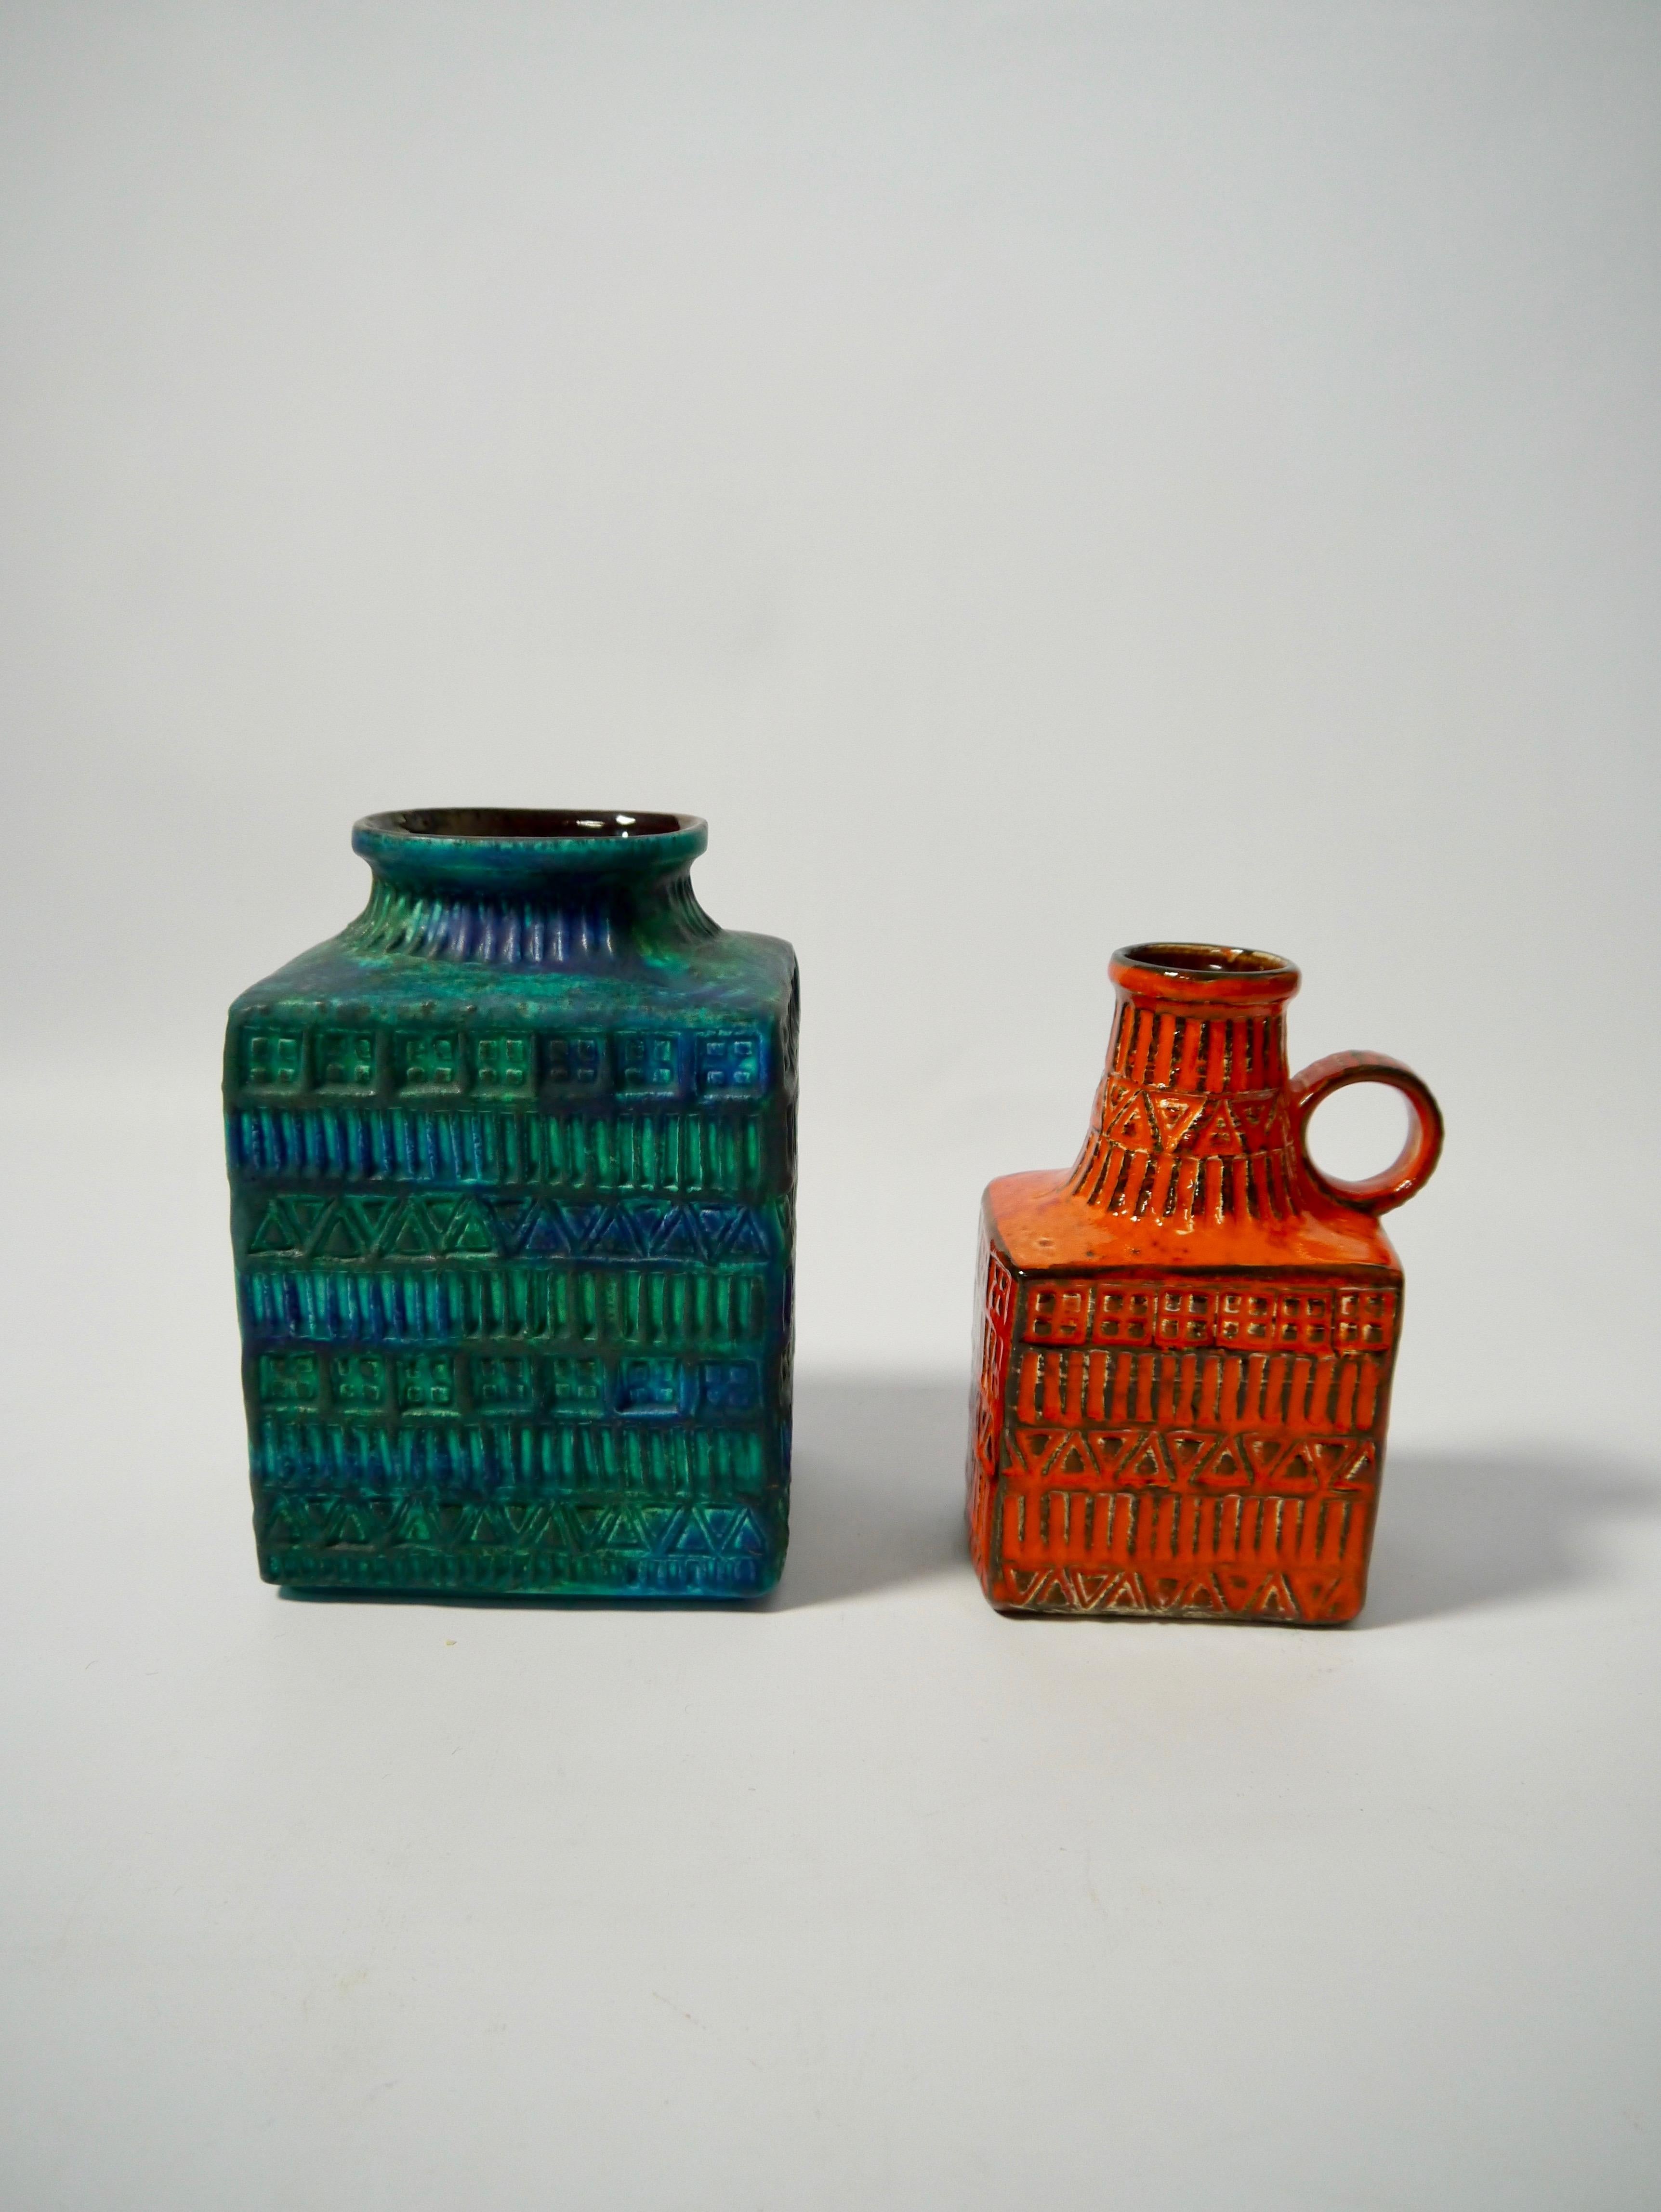 Pair of Mid-Century Modern glazed ceramic vases designed by Bodo Mans for BAY Keramik, West Germany, 1960s. Decorative geometric pattern and vibrant shades of orange and blue and green. 

 